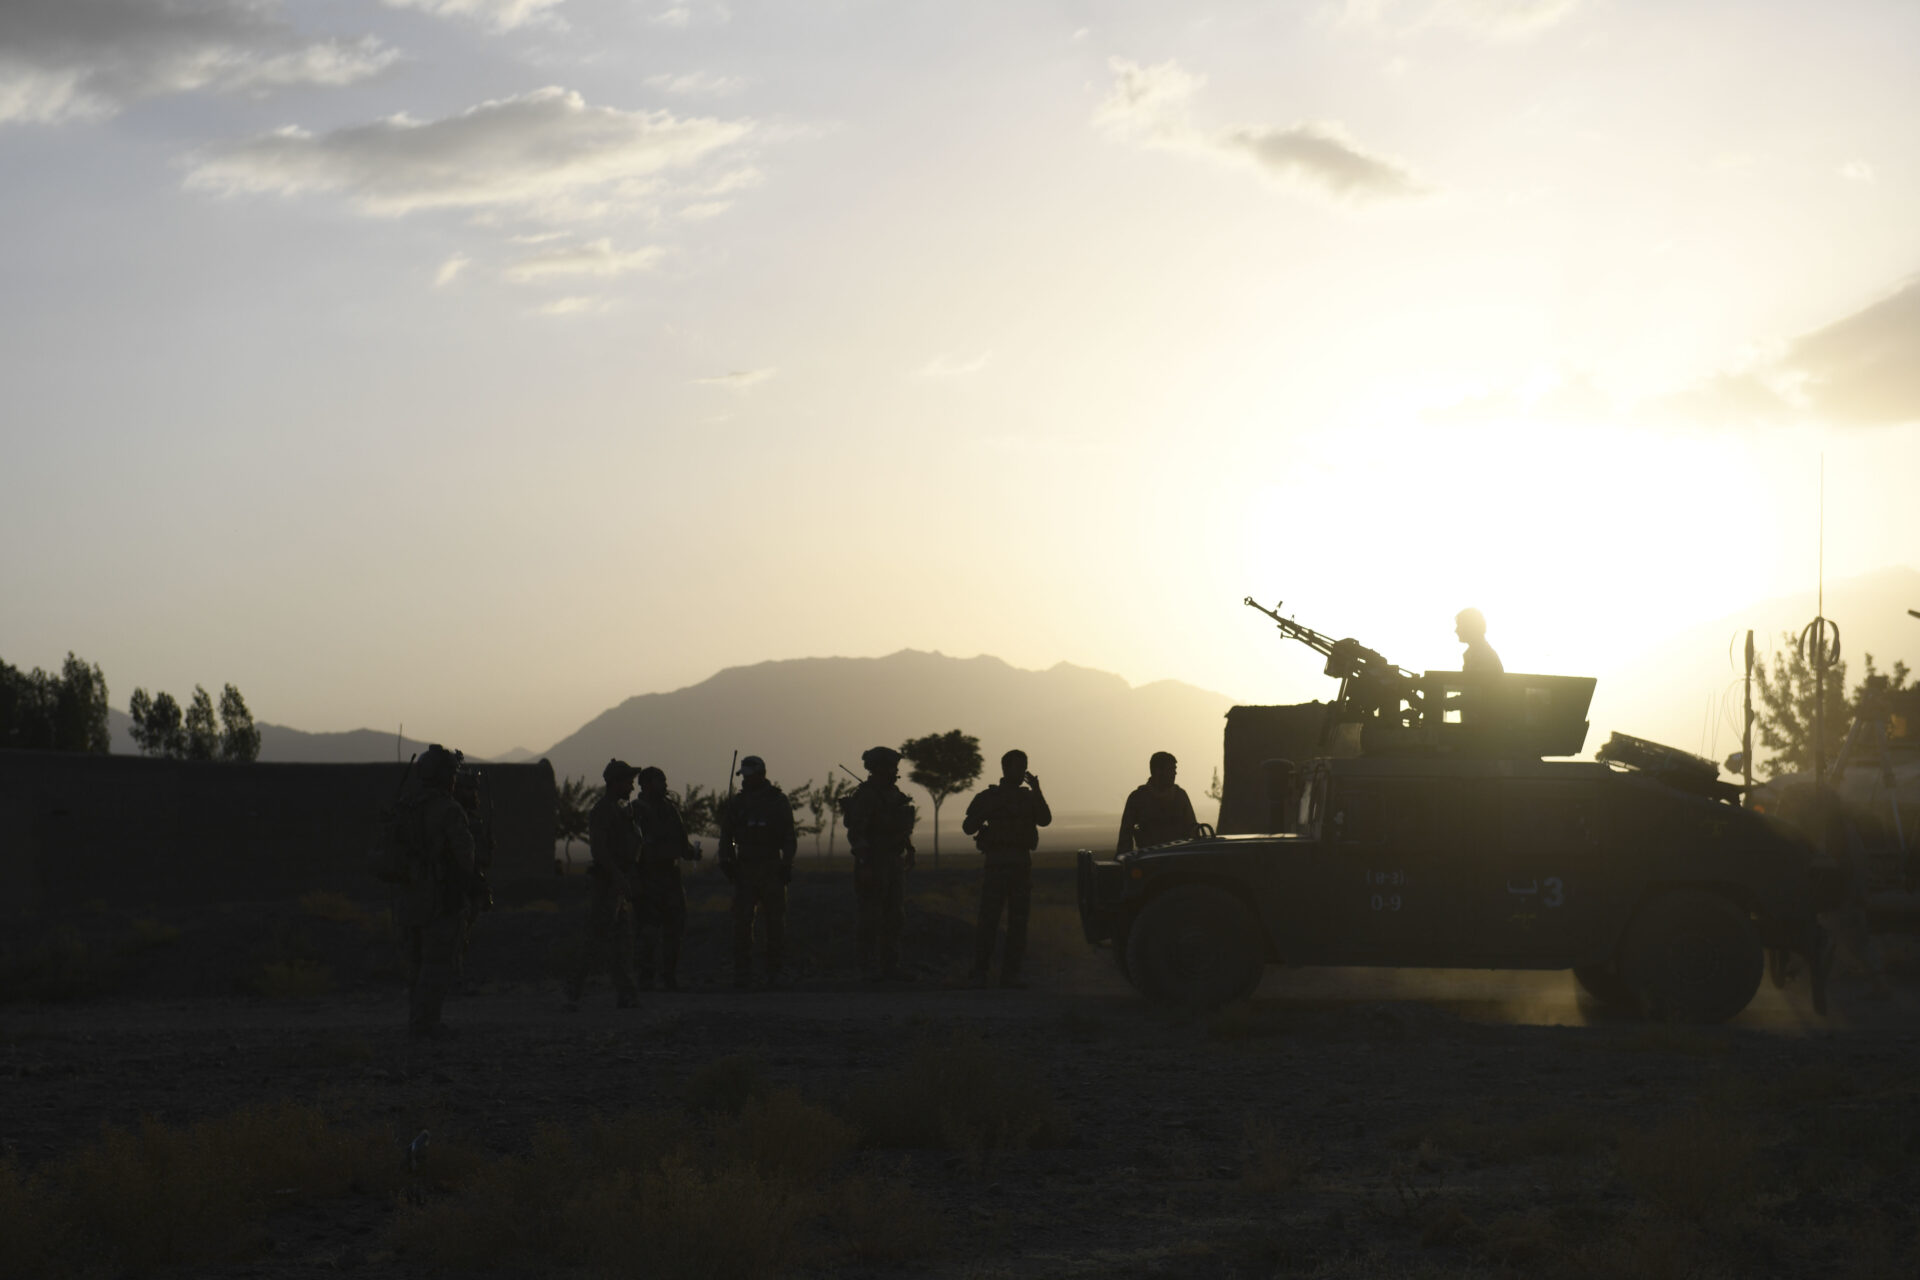 MOHAMMAD AGHA DISTRICT, Afghanistan (July 28, 2018) -- Afghan Special Security Forces and U.S. Special Operations soldiers enjoy a sunset in Mohammad Agha district, Logar province, Afghanistan, July 28, 2018. (U.S. Air Force photo by Staff Sgt. Nicholas Byers)